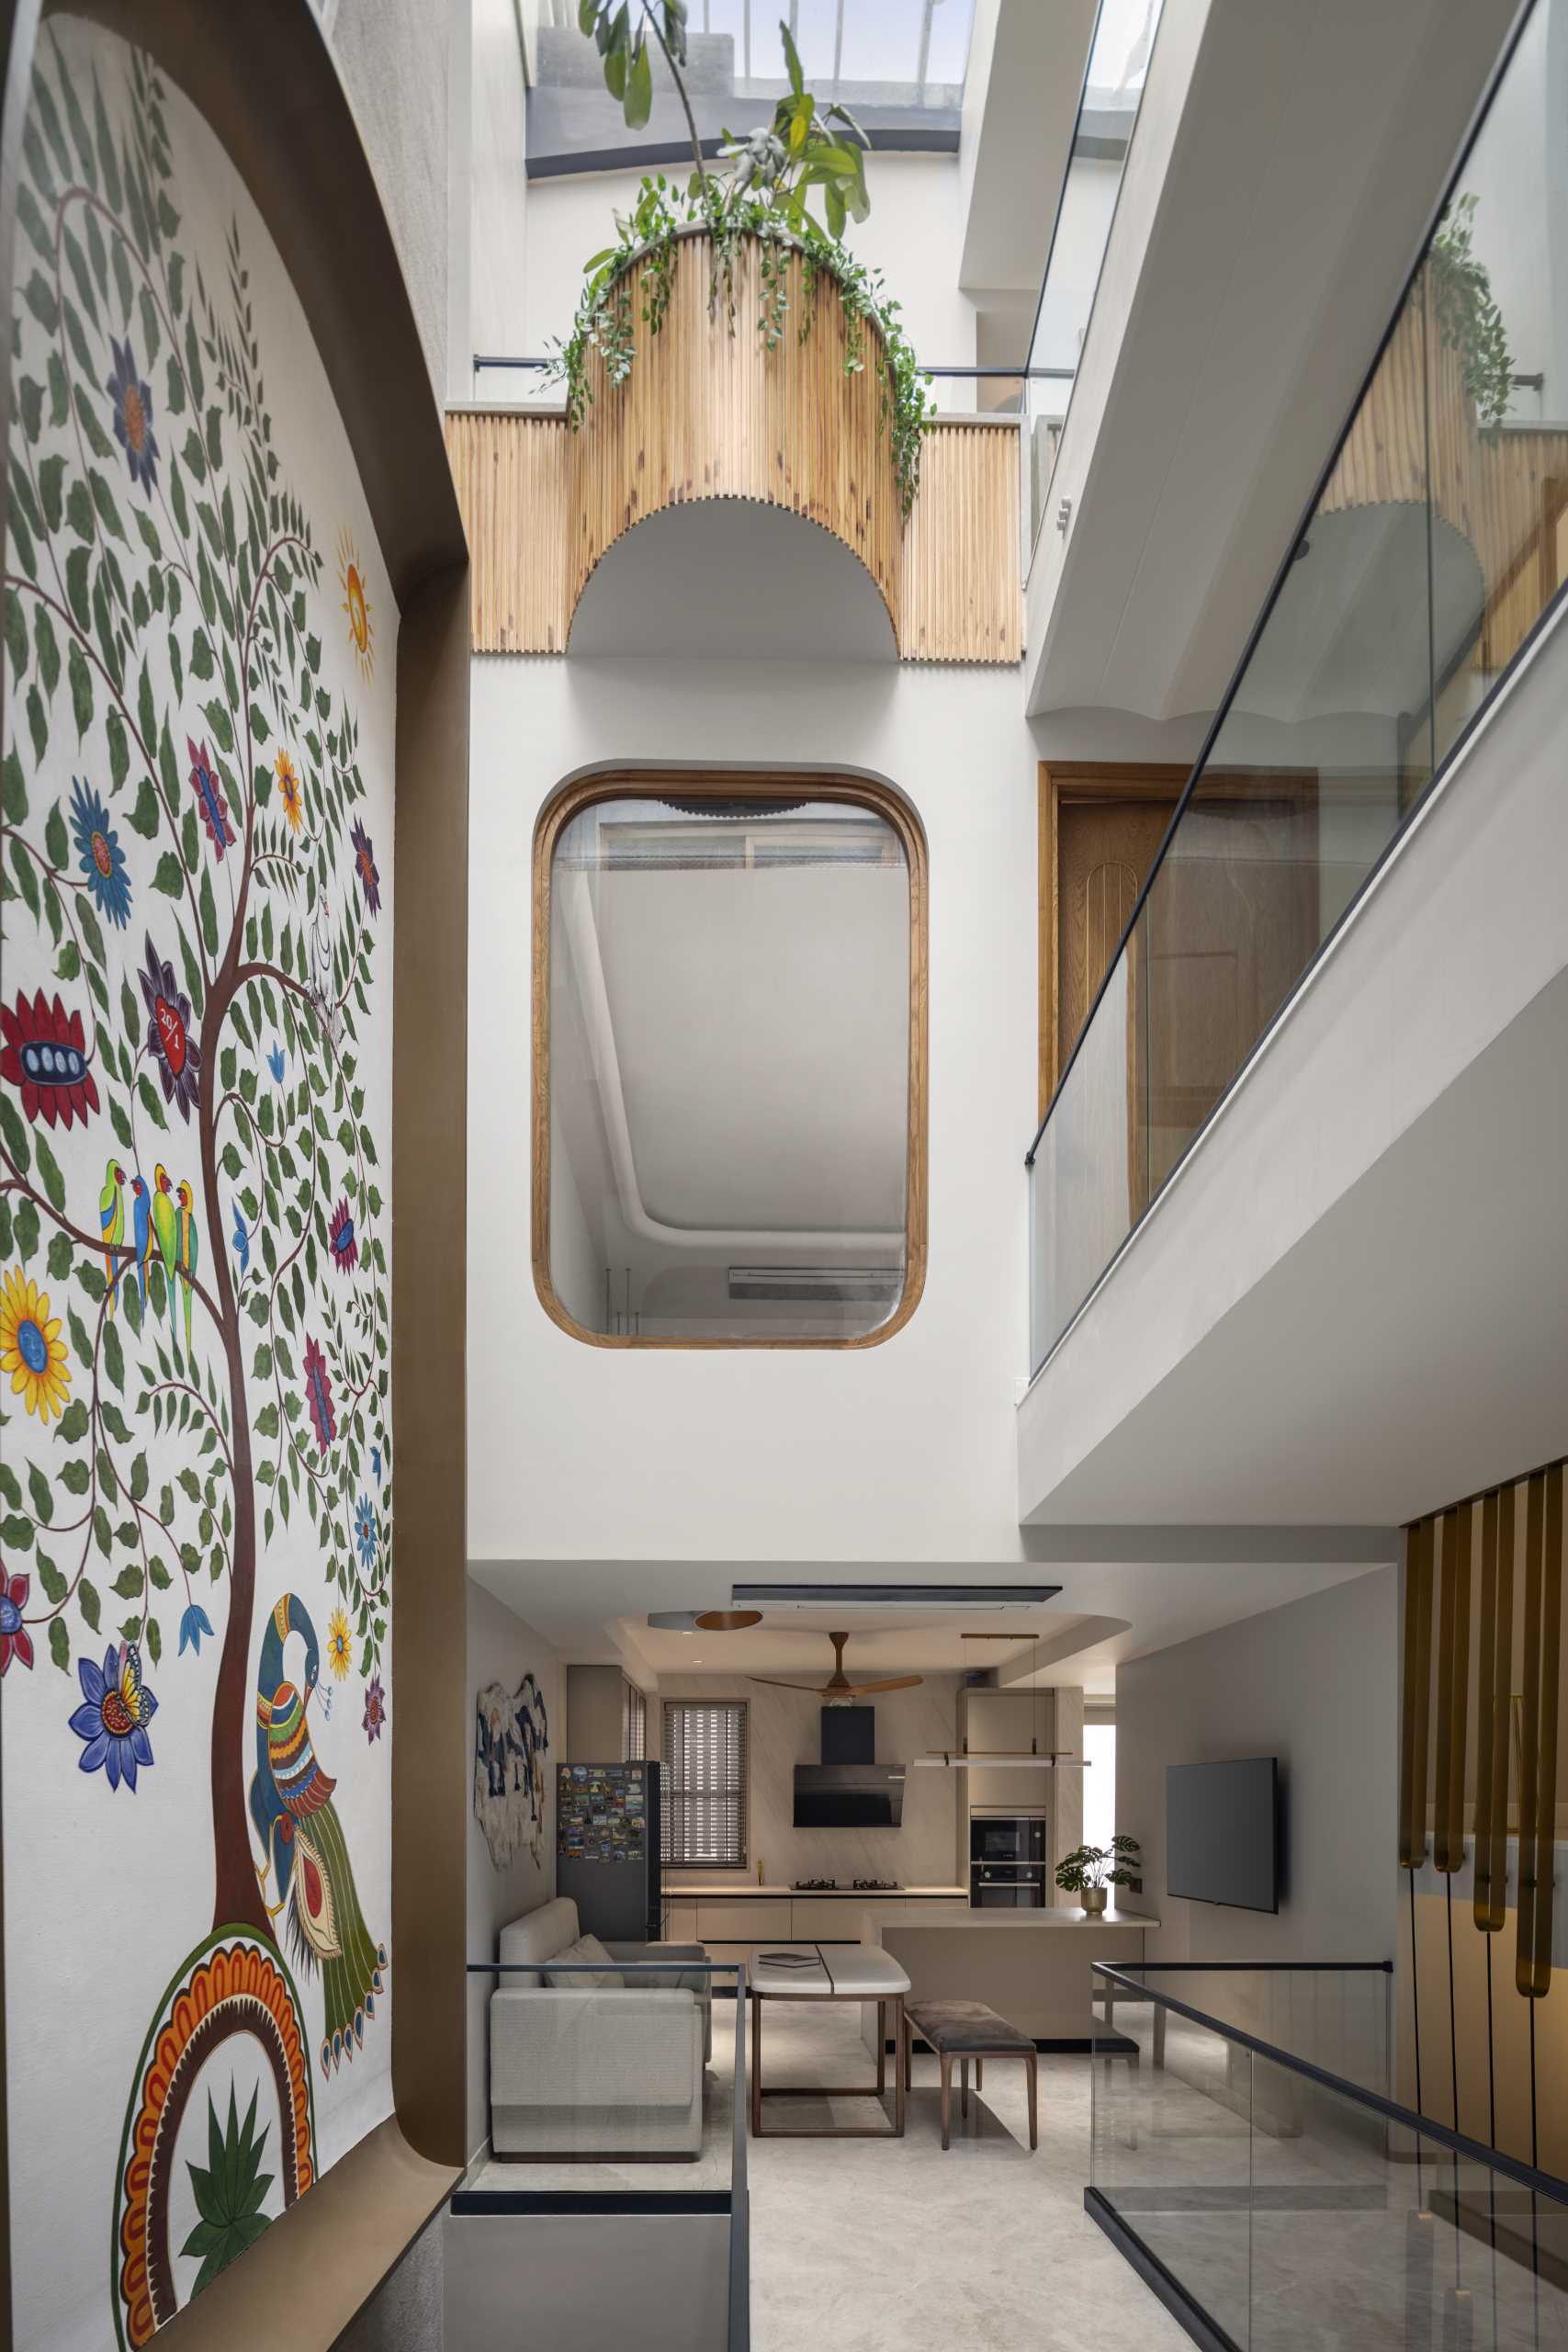 A tall and narrow house with a large colorful wall mural.